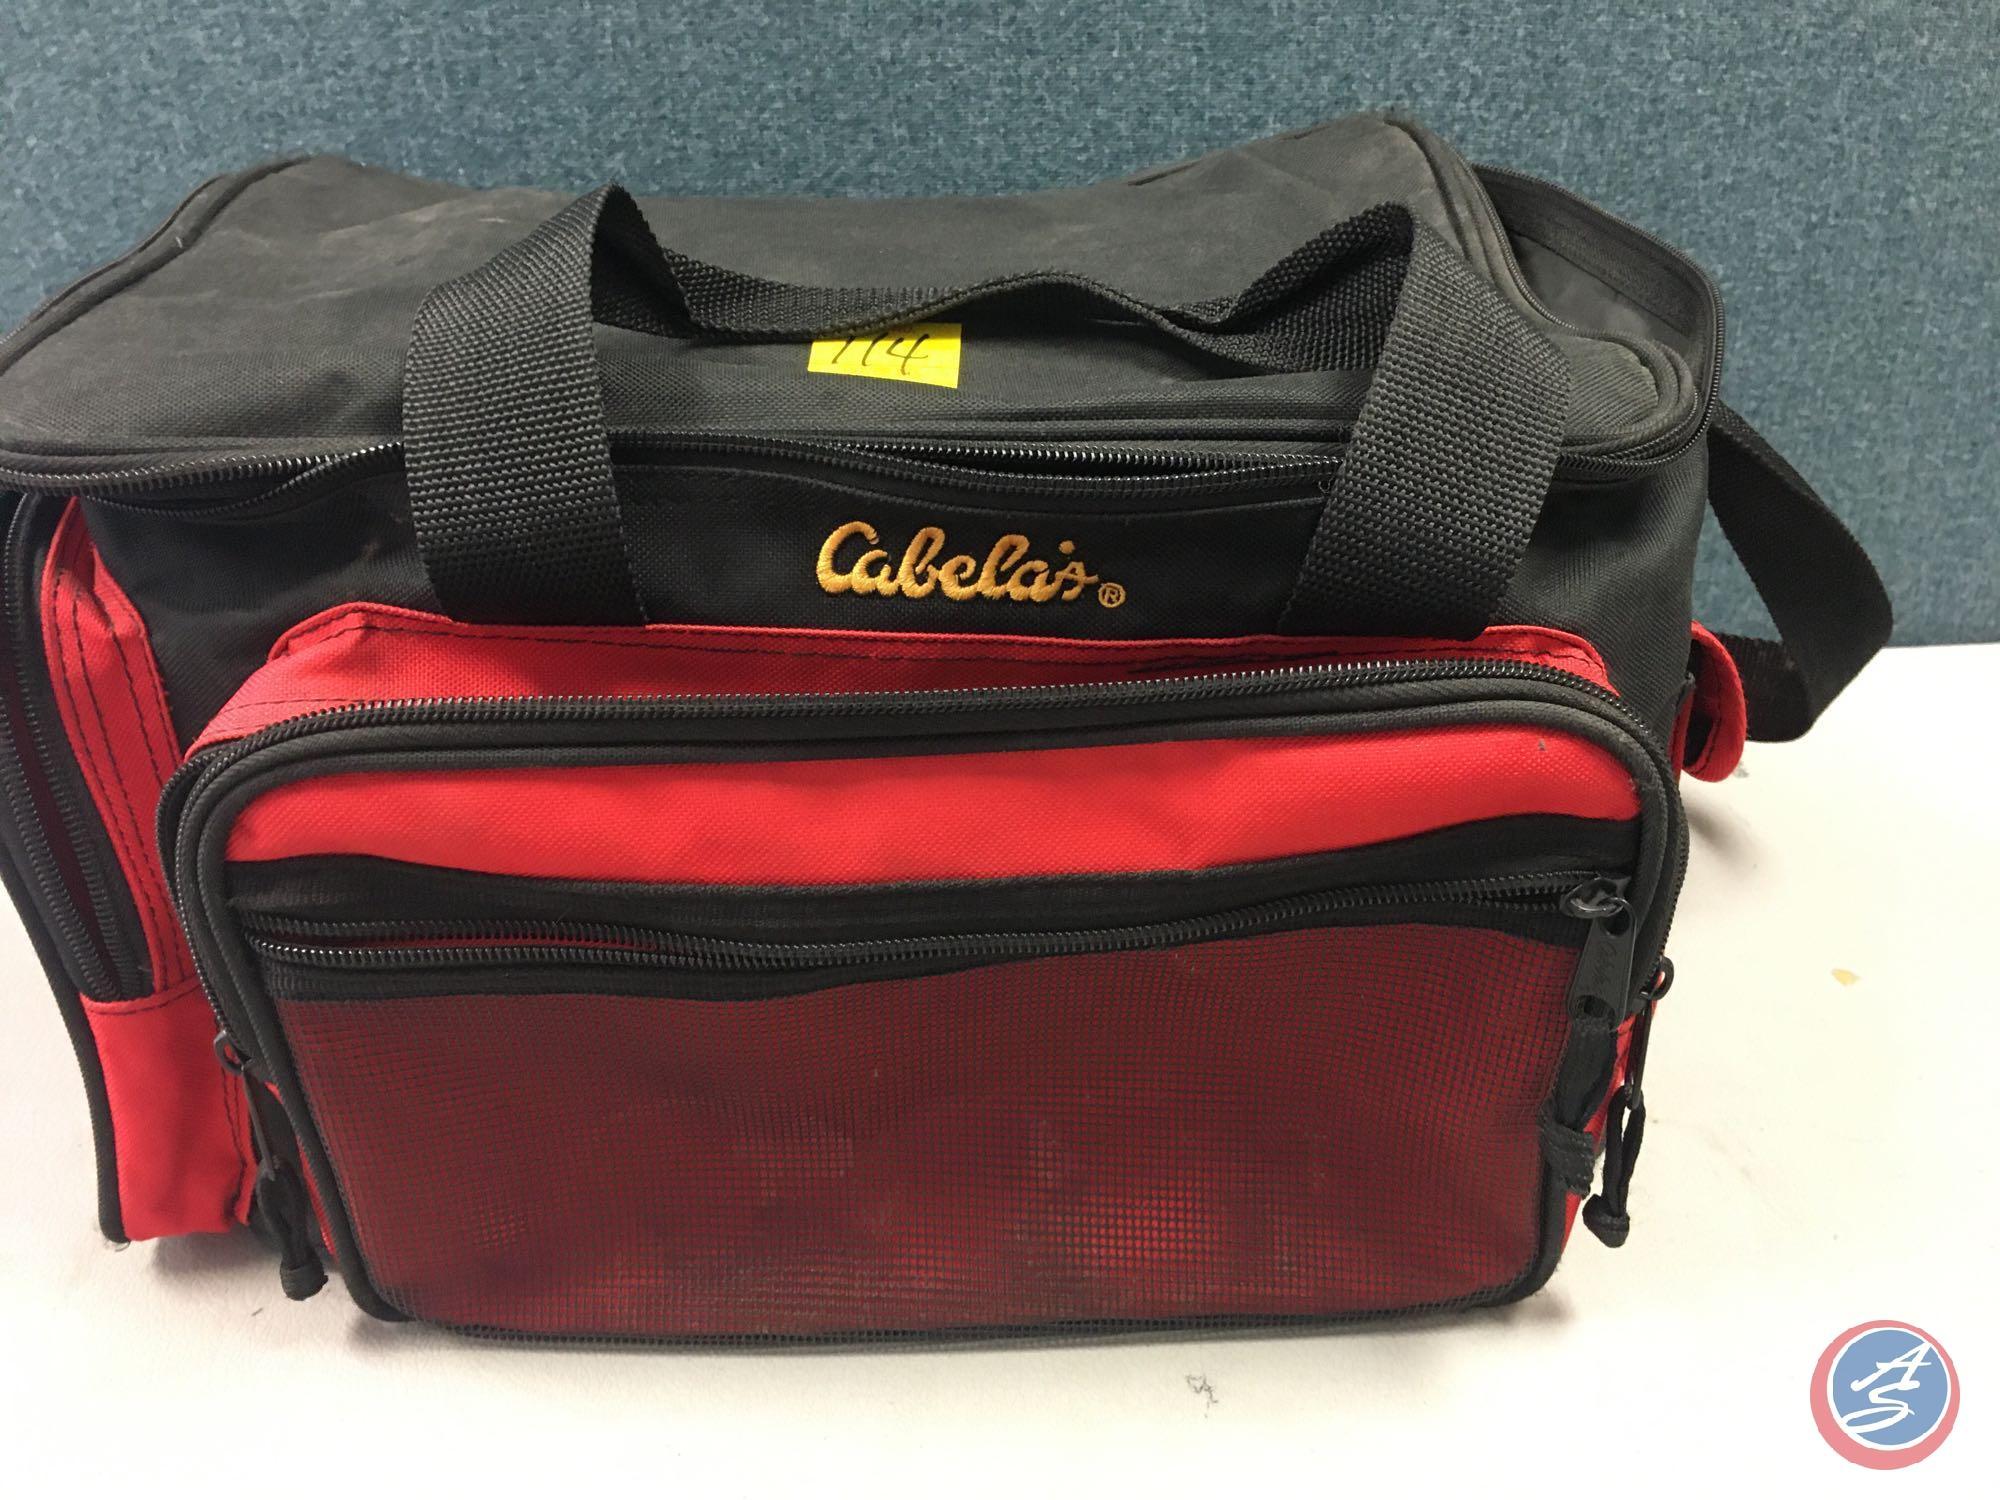 Cabela?s tackle storage bag w/contents included - Lures of the various types, Hooks, Weights, and